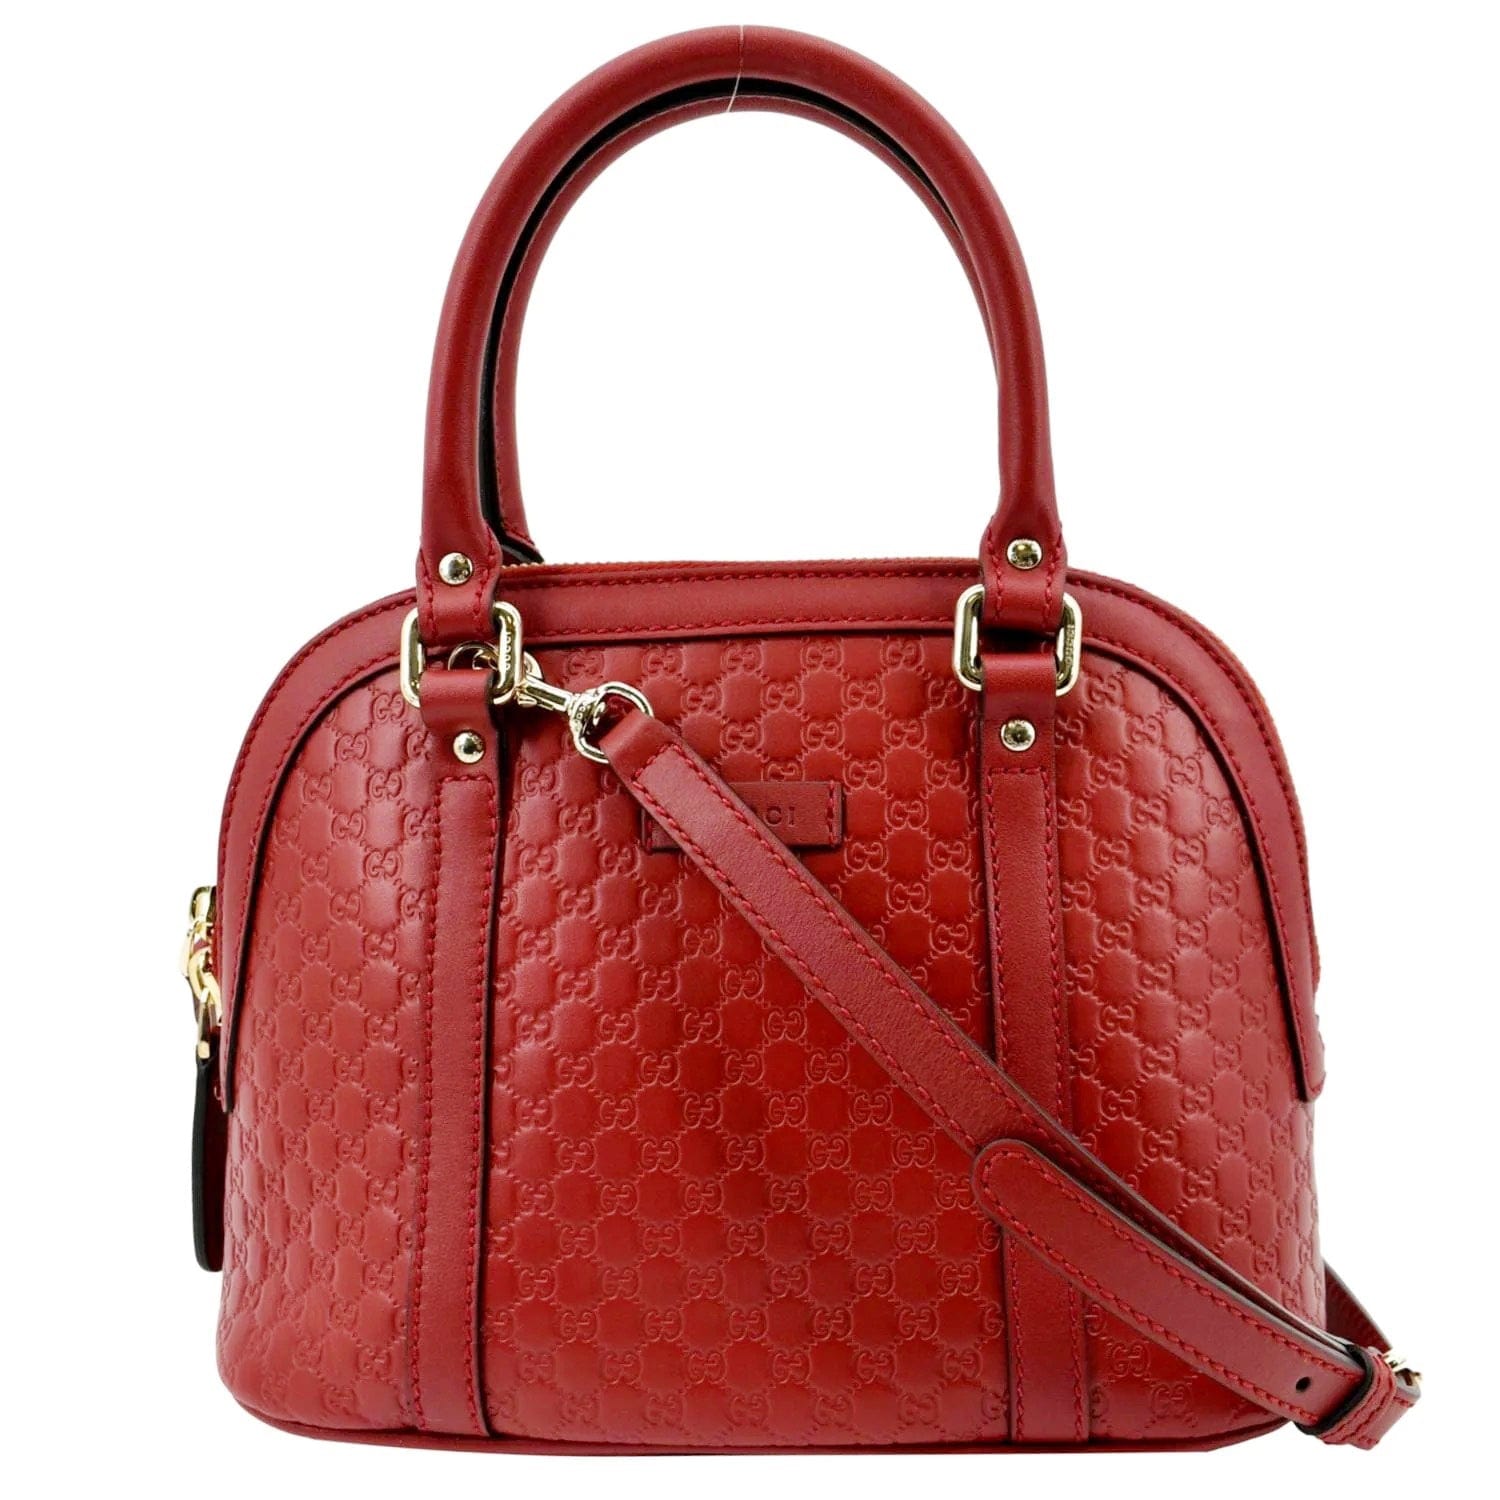 Gucci Dome Convertible Leather Crossbody Bag